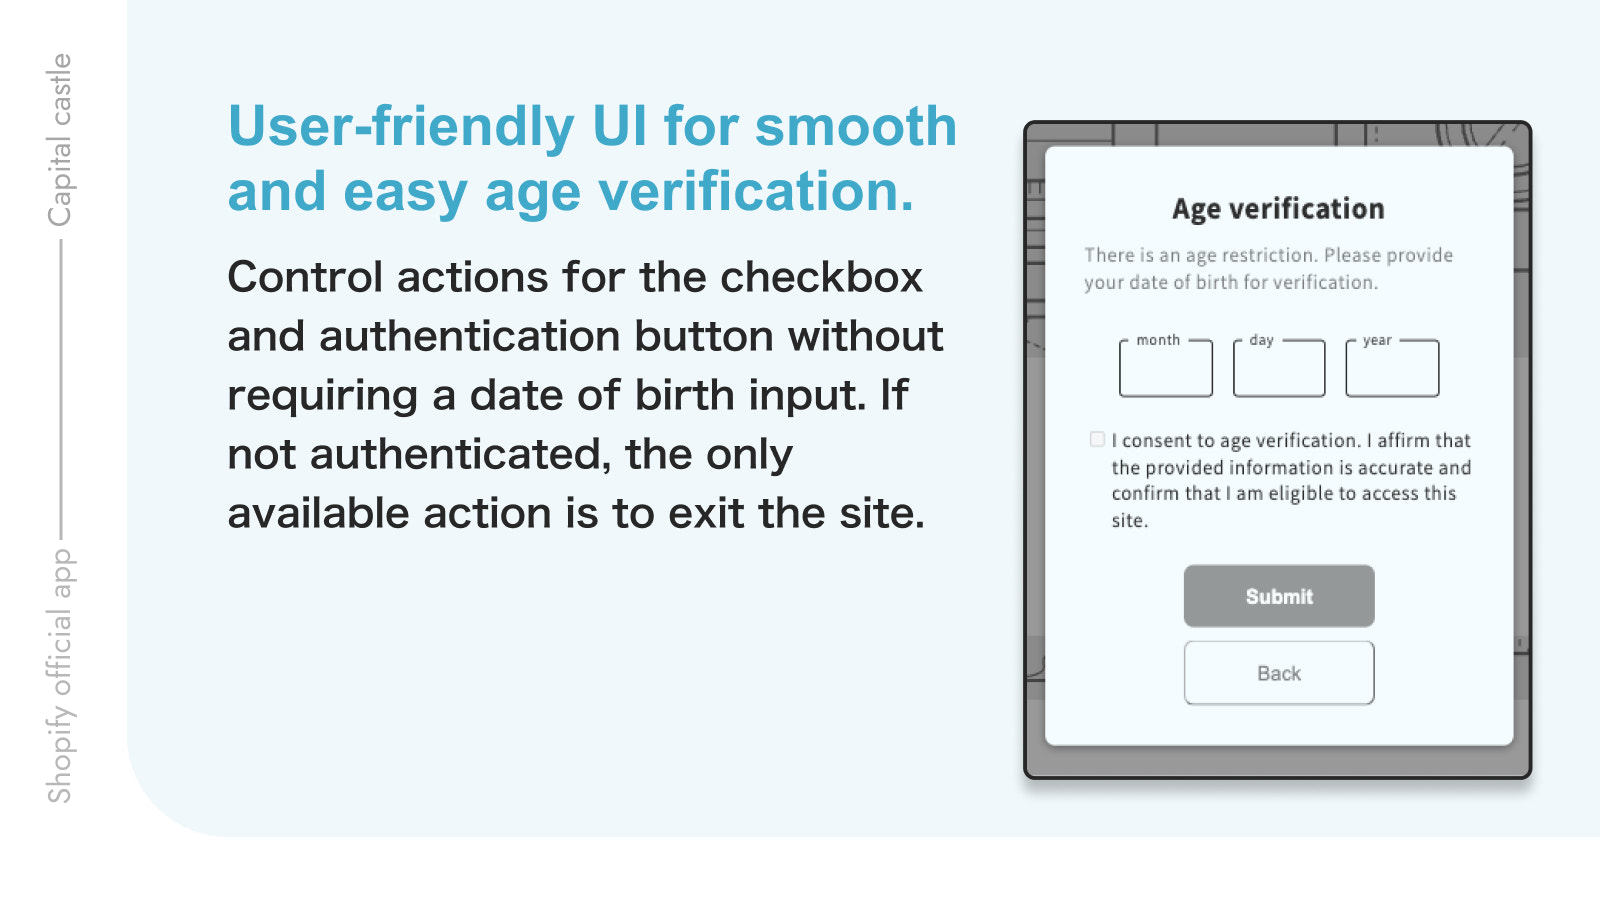 User-friendly UI for smooth and easy age verification.